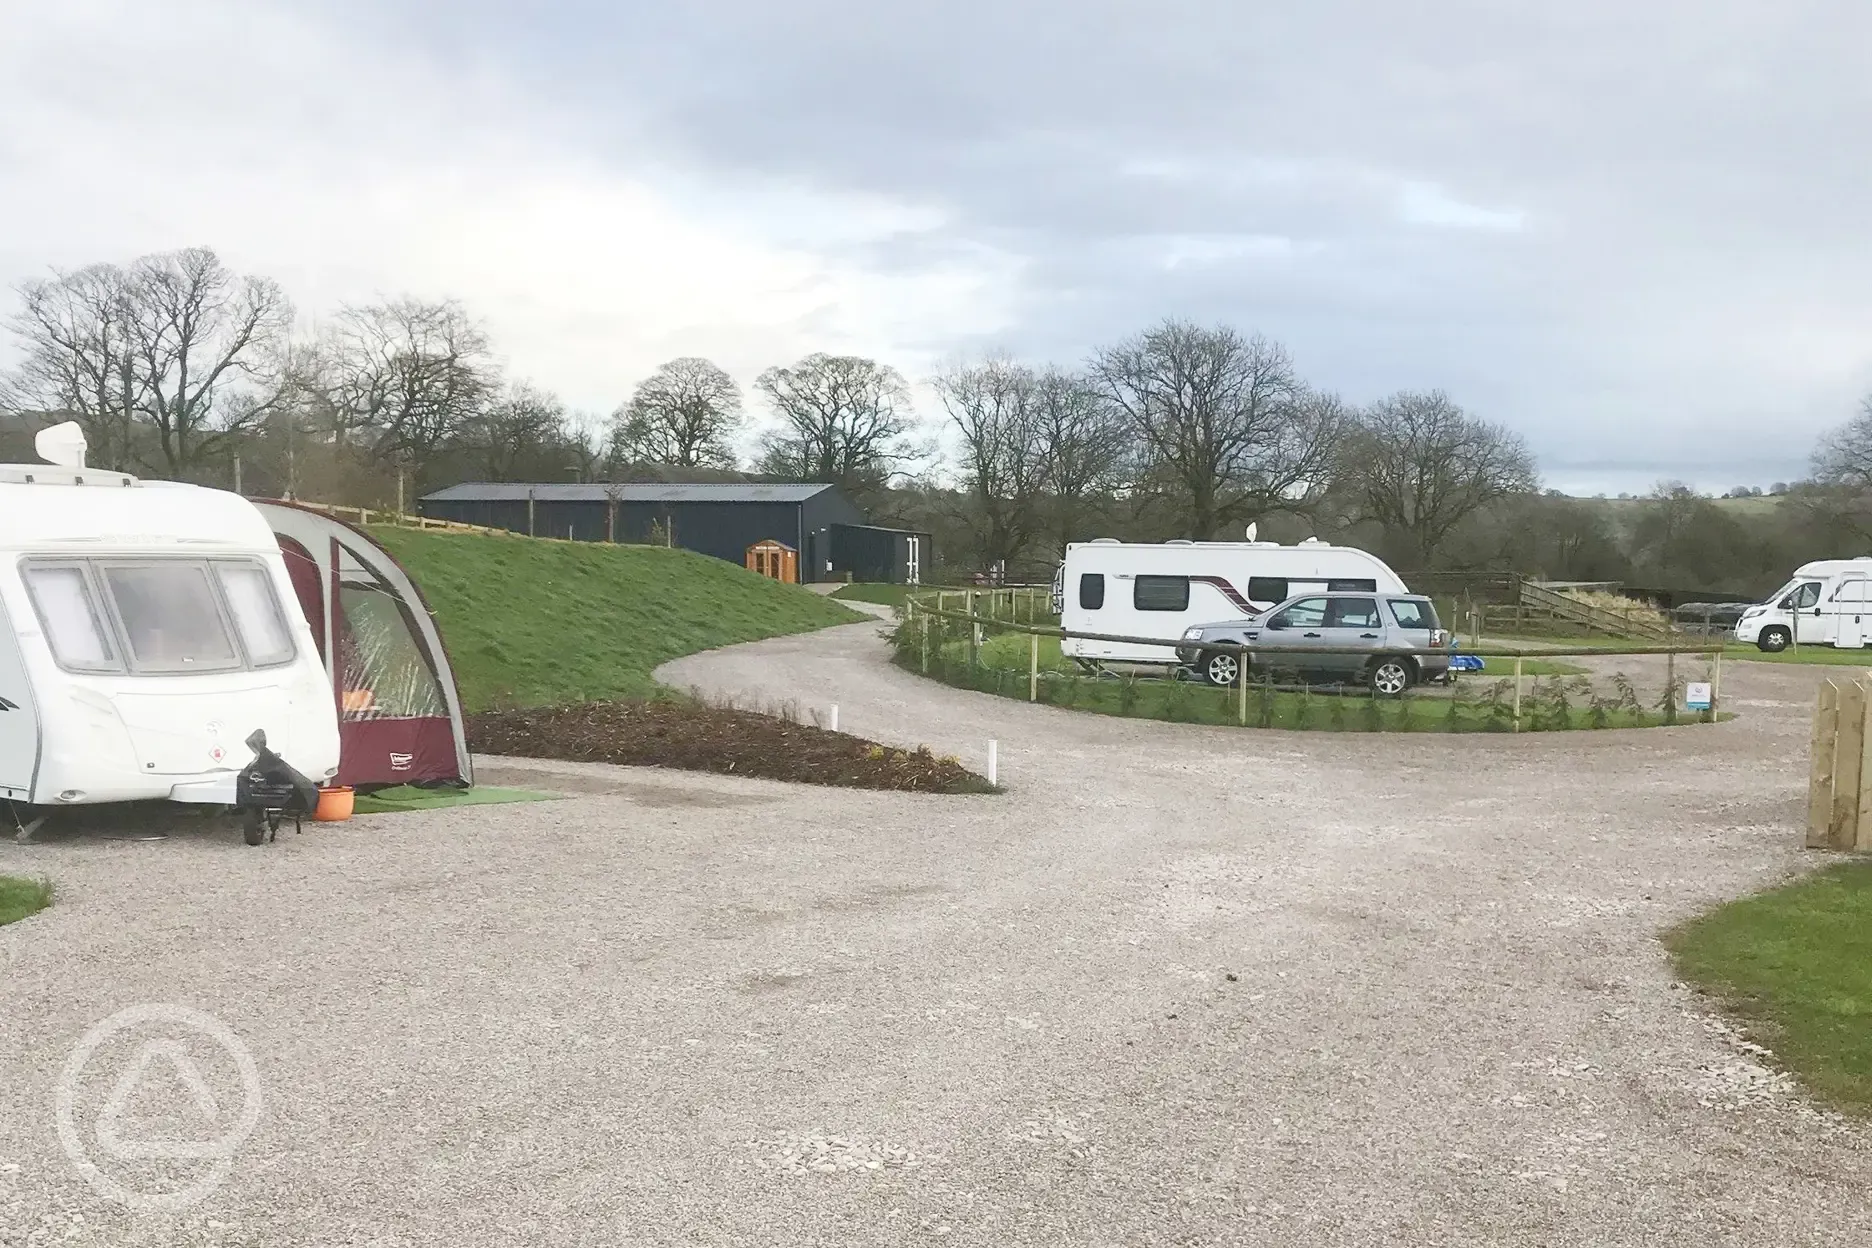 Caravans and trailer tents on site